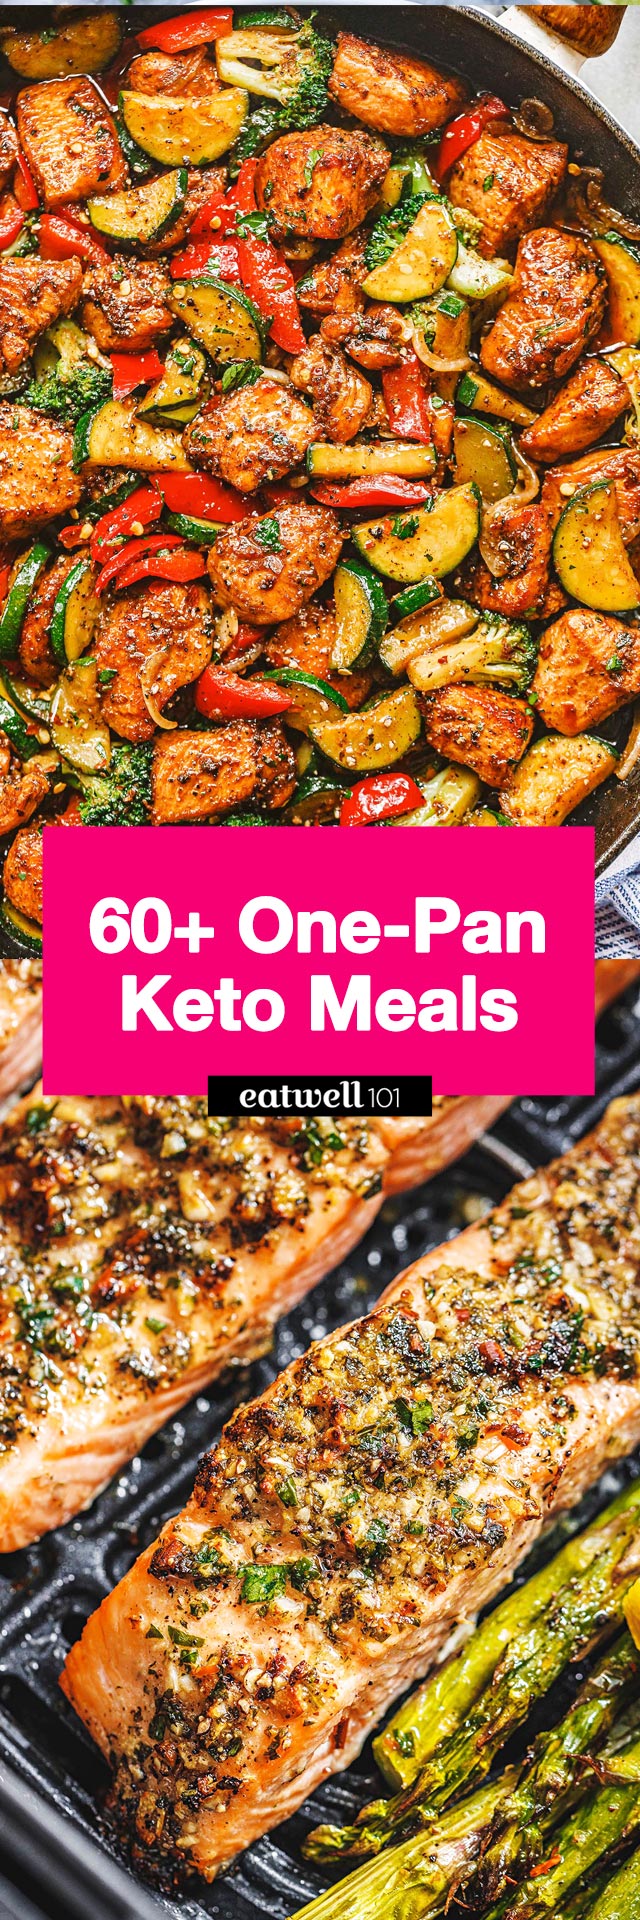 60+ One-Pan Keto Meals For Dinner {Quick and Easy} - #keto #dinner #meal #recipes #eatwell101 - These One Pan Keto Meals will become one of your all-time favorites! Our Keto-friendly one-pan recipes are the perfect solution to simplify your meal prep and cleanup.